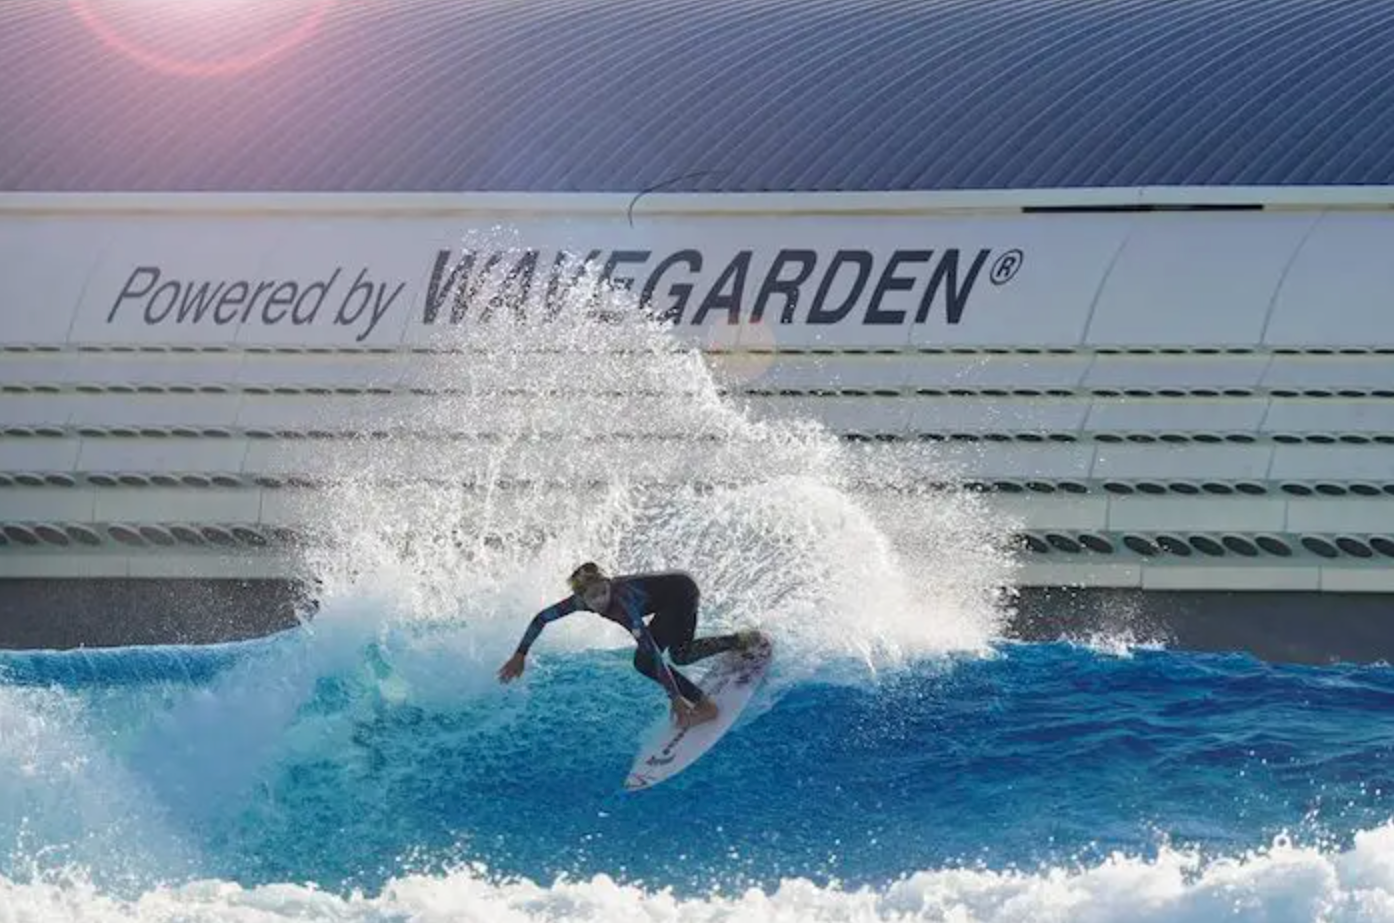 Plans officially approved for new £60 million surfing lagoon in Trafford, The Manc